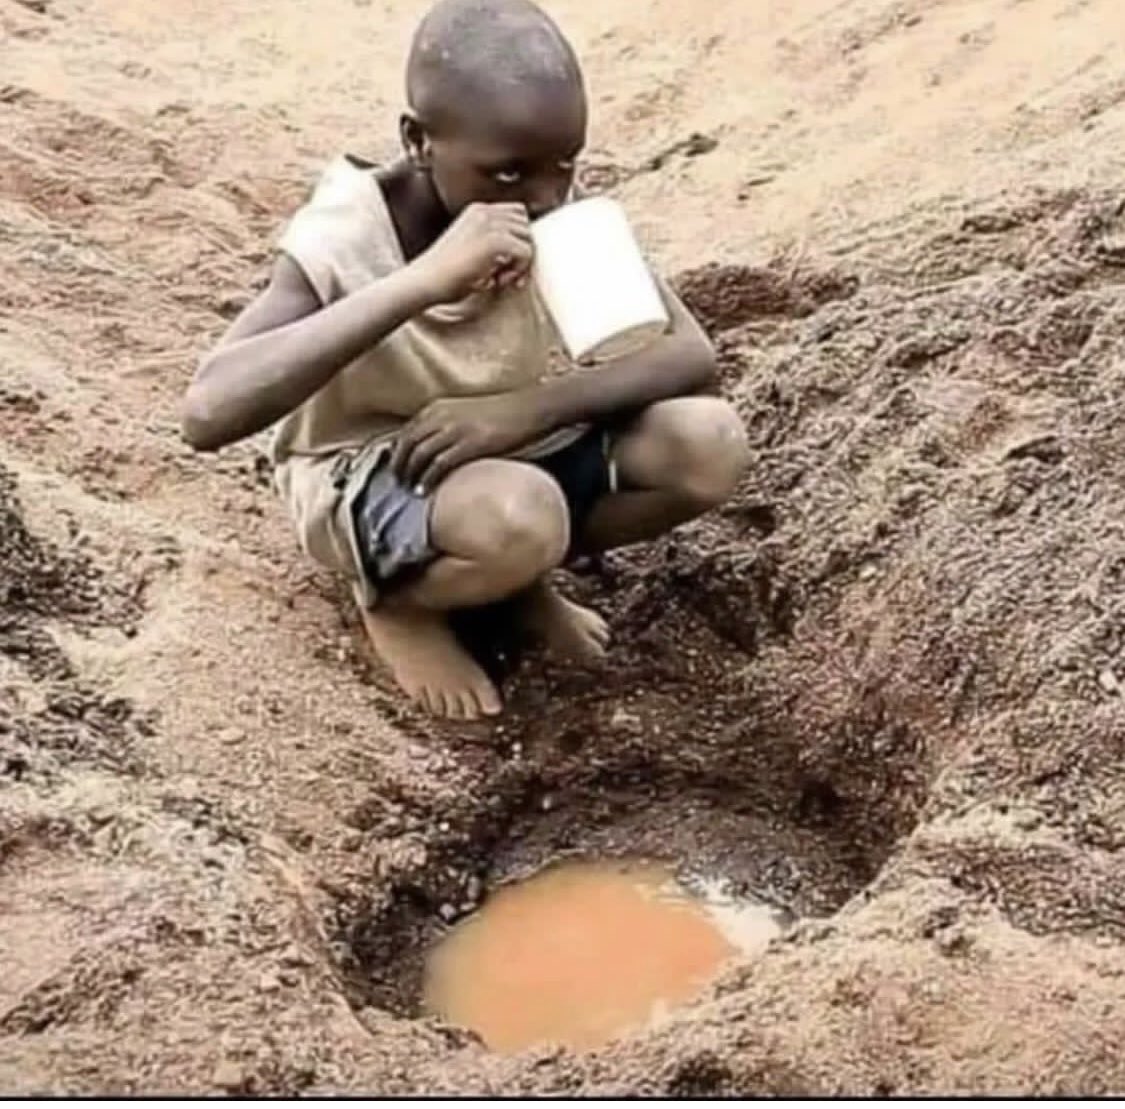 What if this is your drinking water. For a young boy it is. #climatechange disproportionately affects children who are already living in poverty. We need to act now @UNICEFUganda @UNFCCC @UNFPAUganda @UNEP @HKenzah @vanessa_vash #ClimateAction #watercrisis